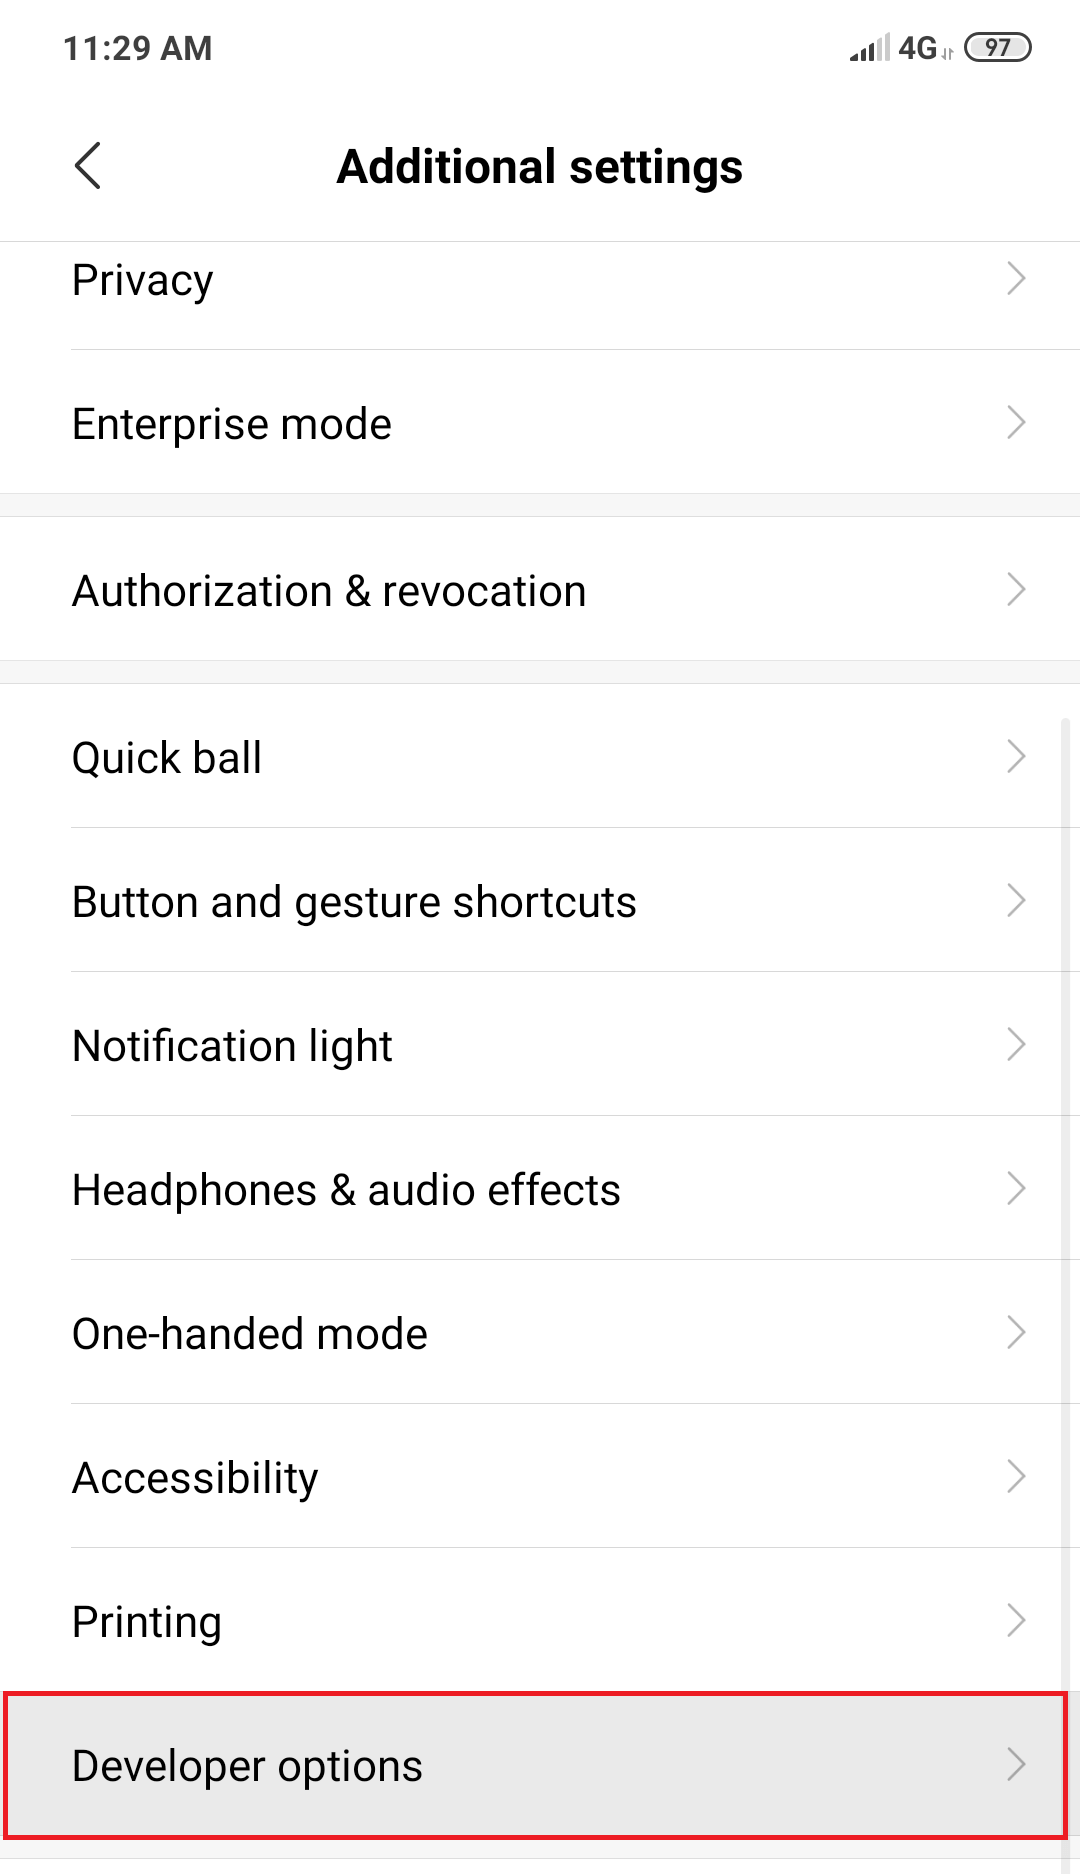 Under Additional settings, click on Developer options